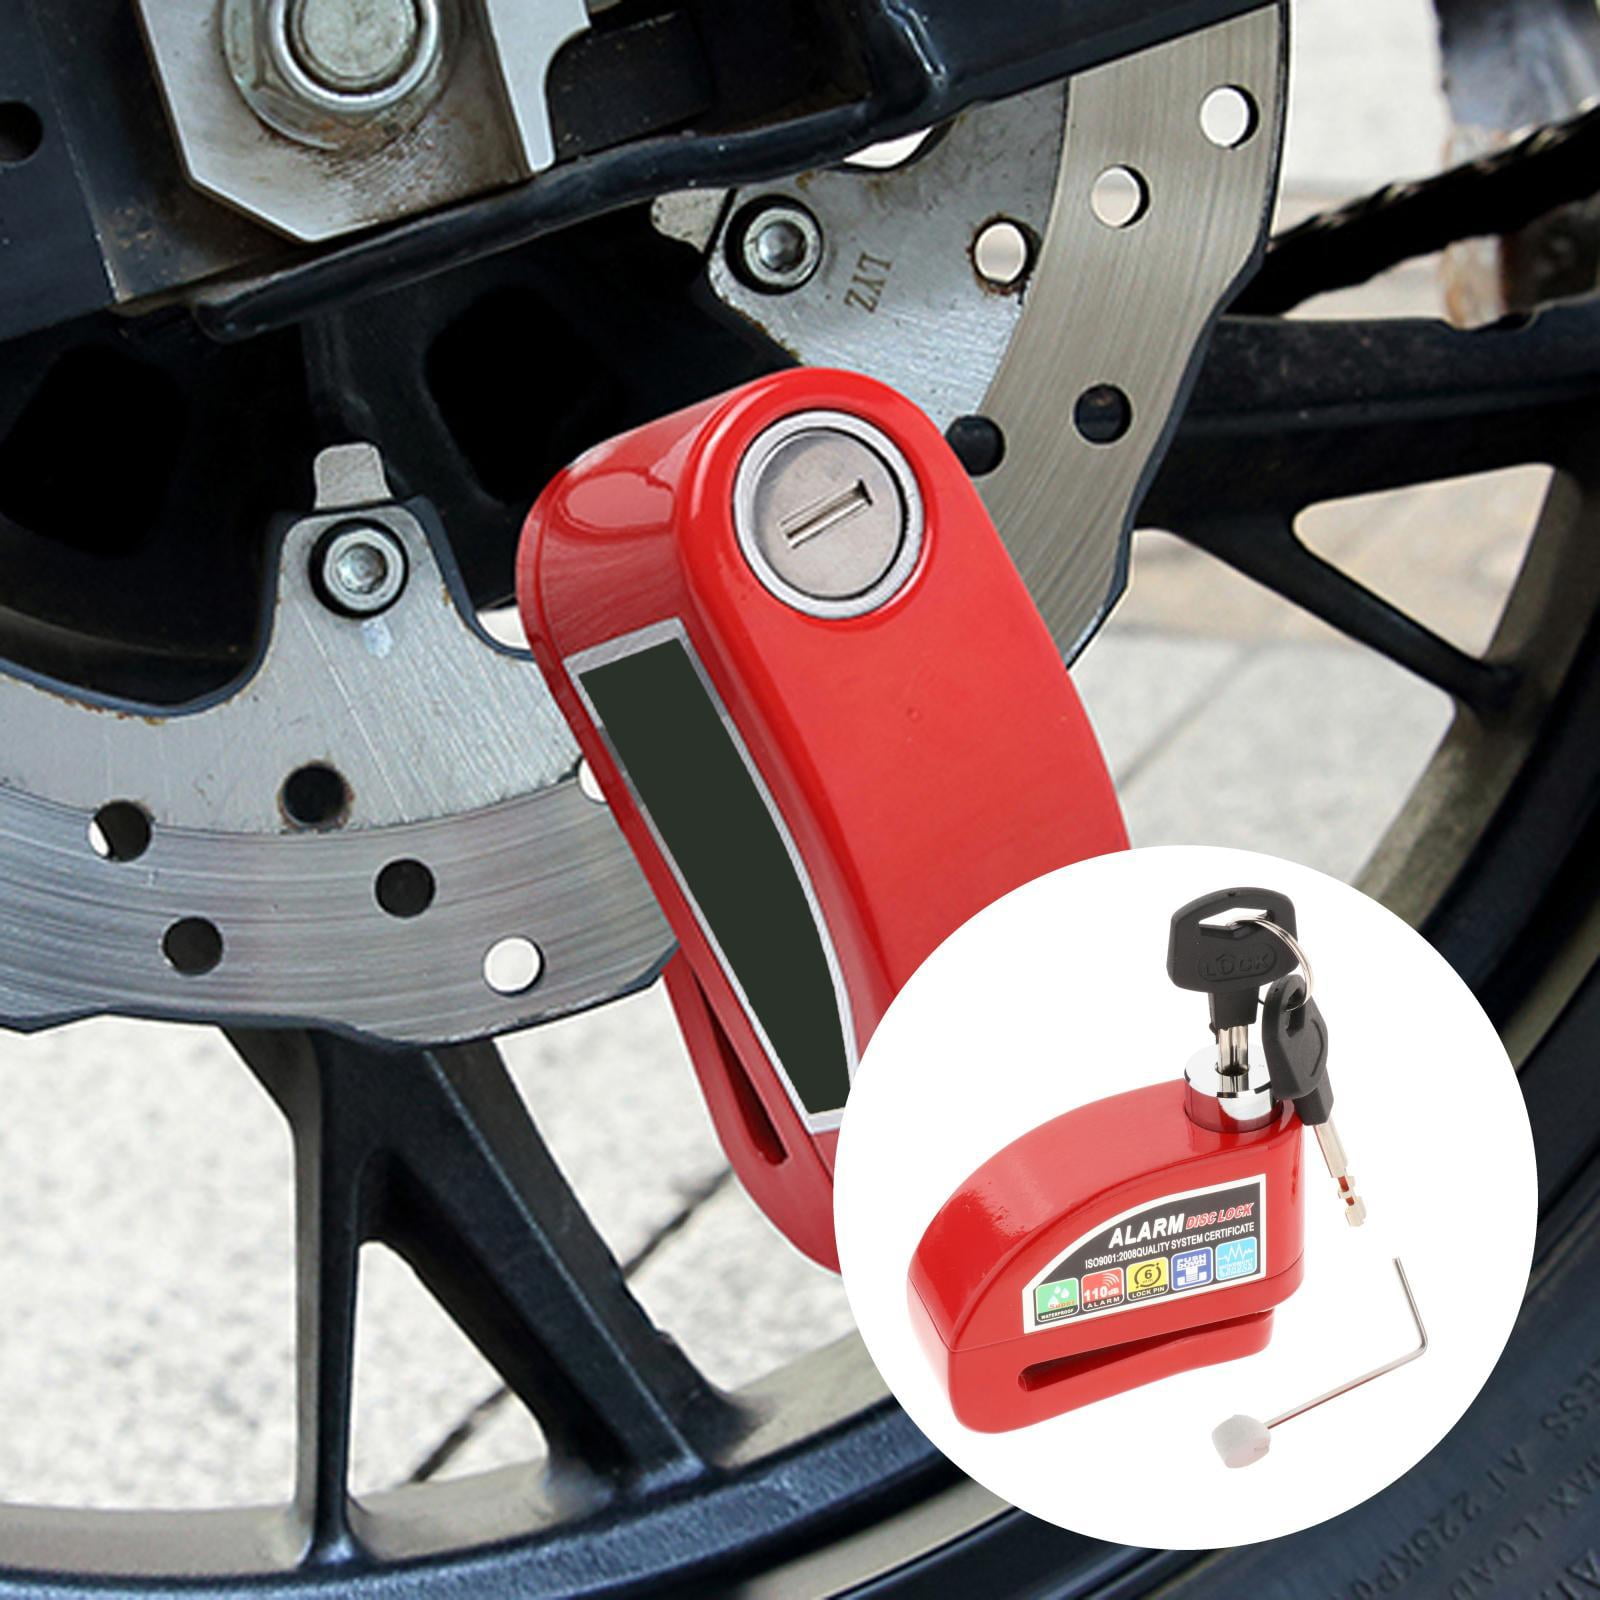 Motorcycle Scooter Anti-theft Brake Disc Lock Wheel Alarm Security 110db Red 